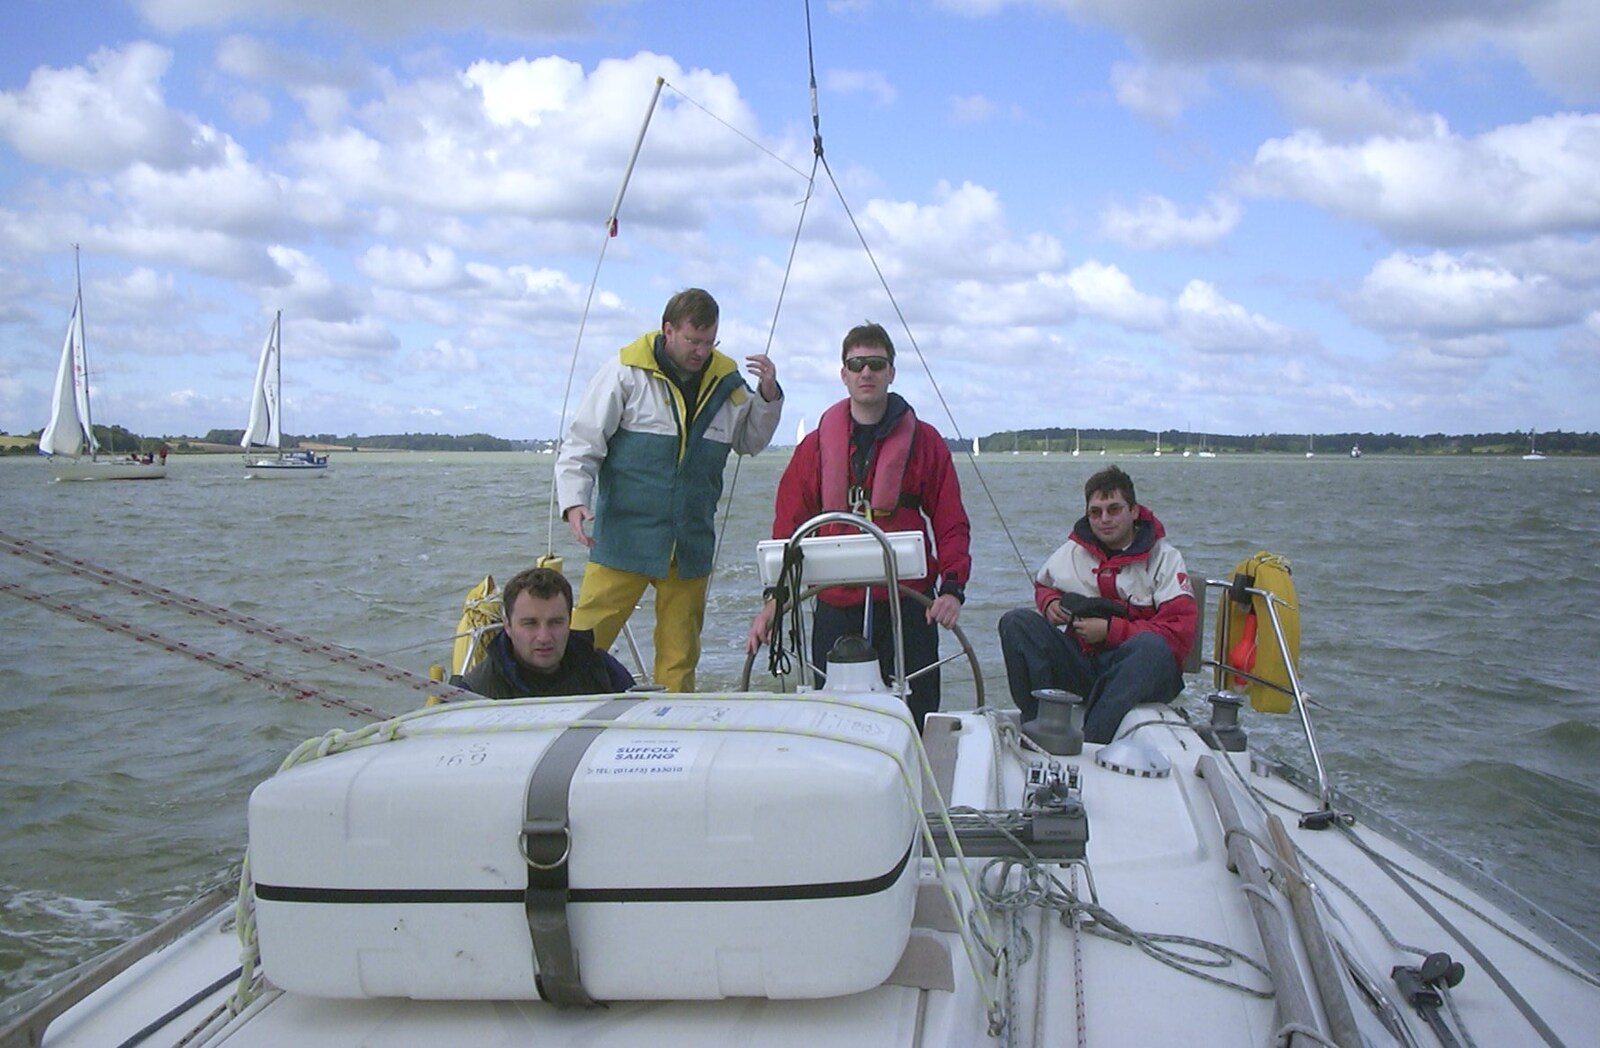 The boys on the boat from A 3G Lab Sailing Trip, Shotley, Suffolk - 6th September 2001